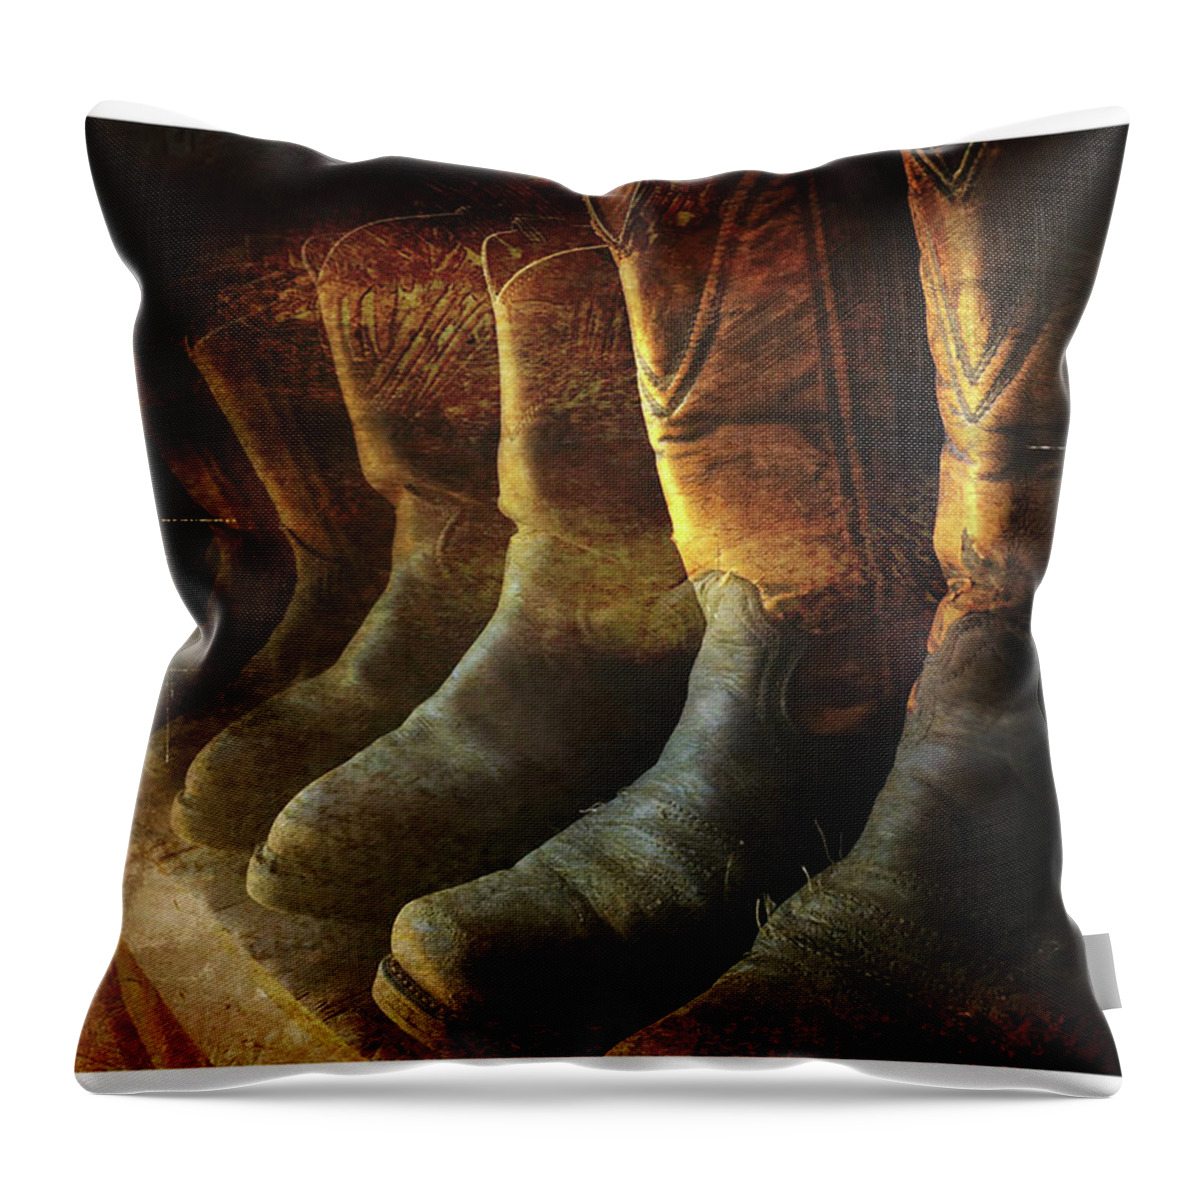 Boots Throw Pillow featuring the photograph Cowboy Boots by Peggy Dietz